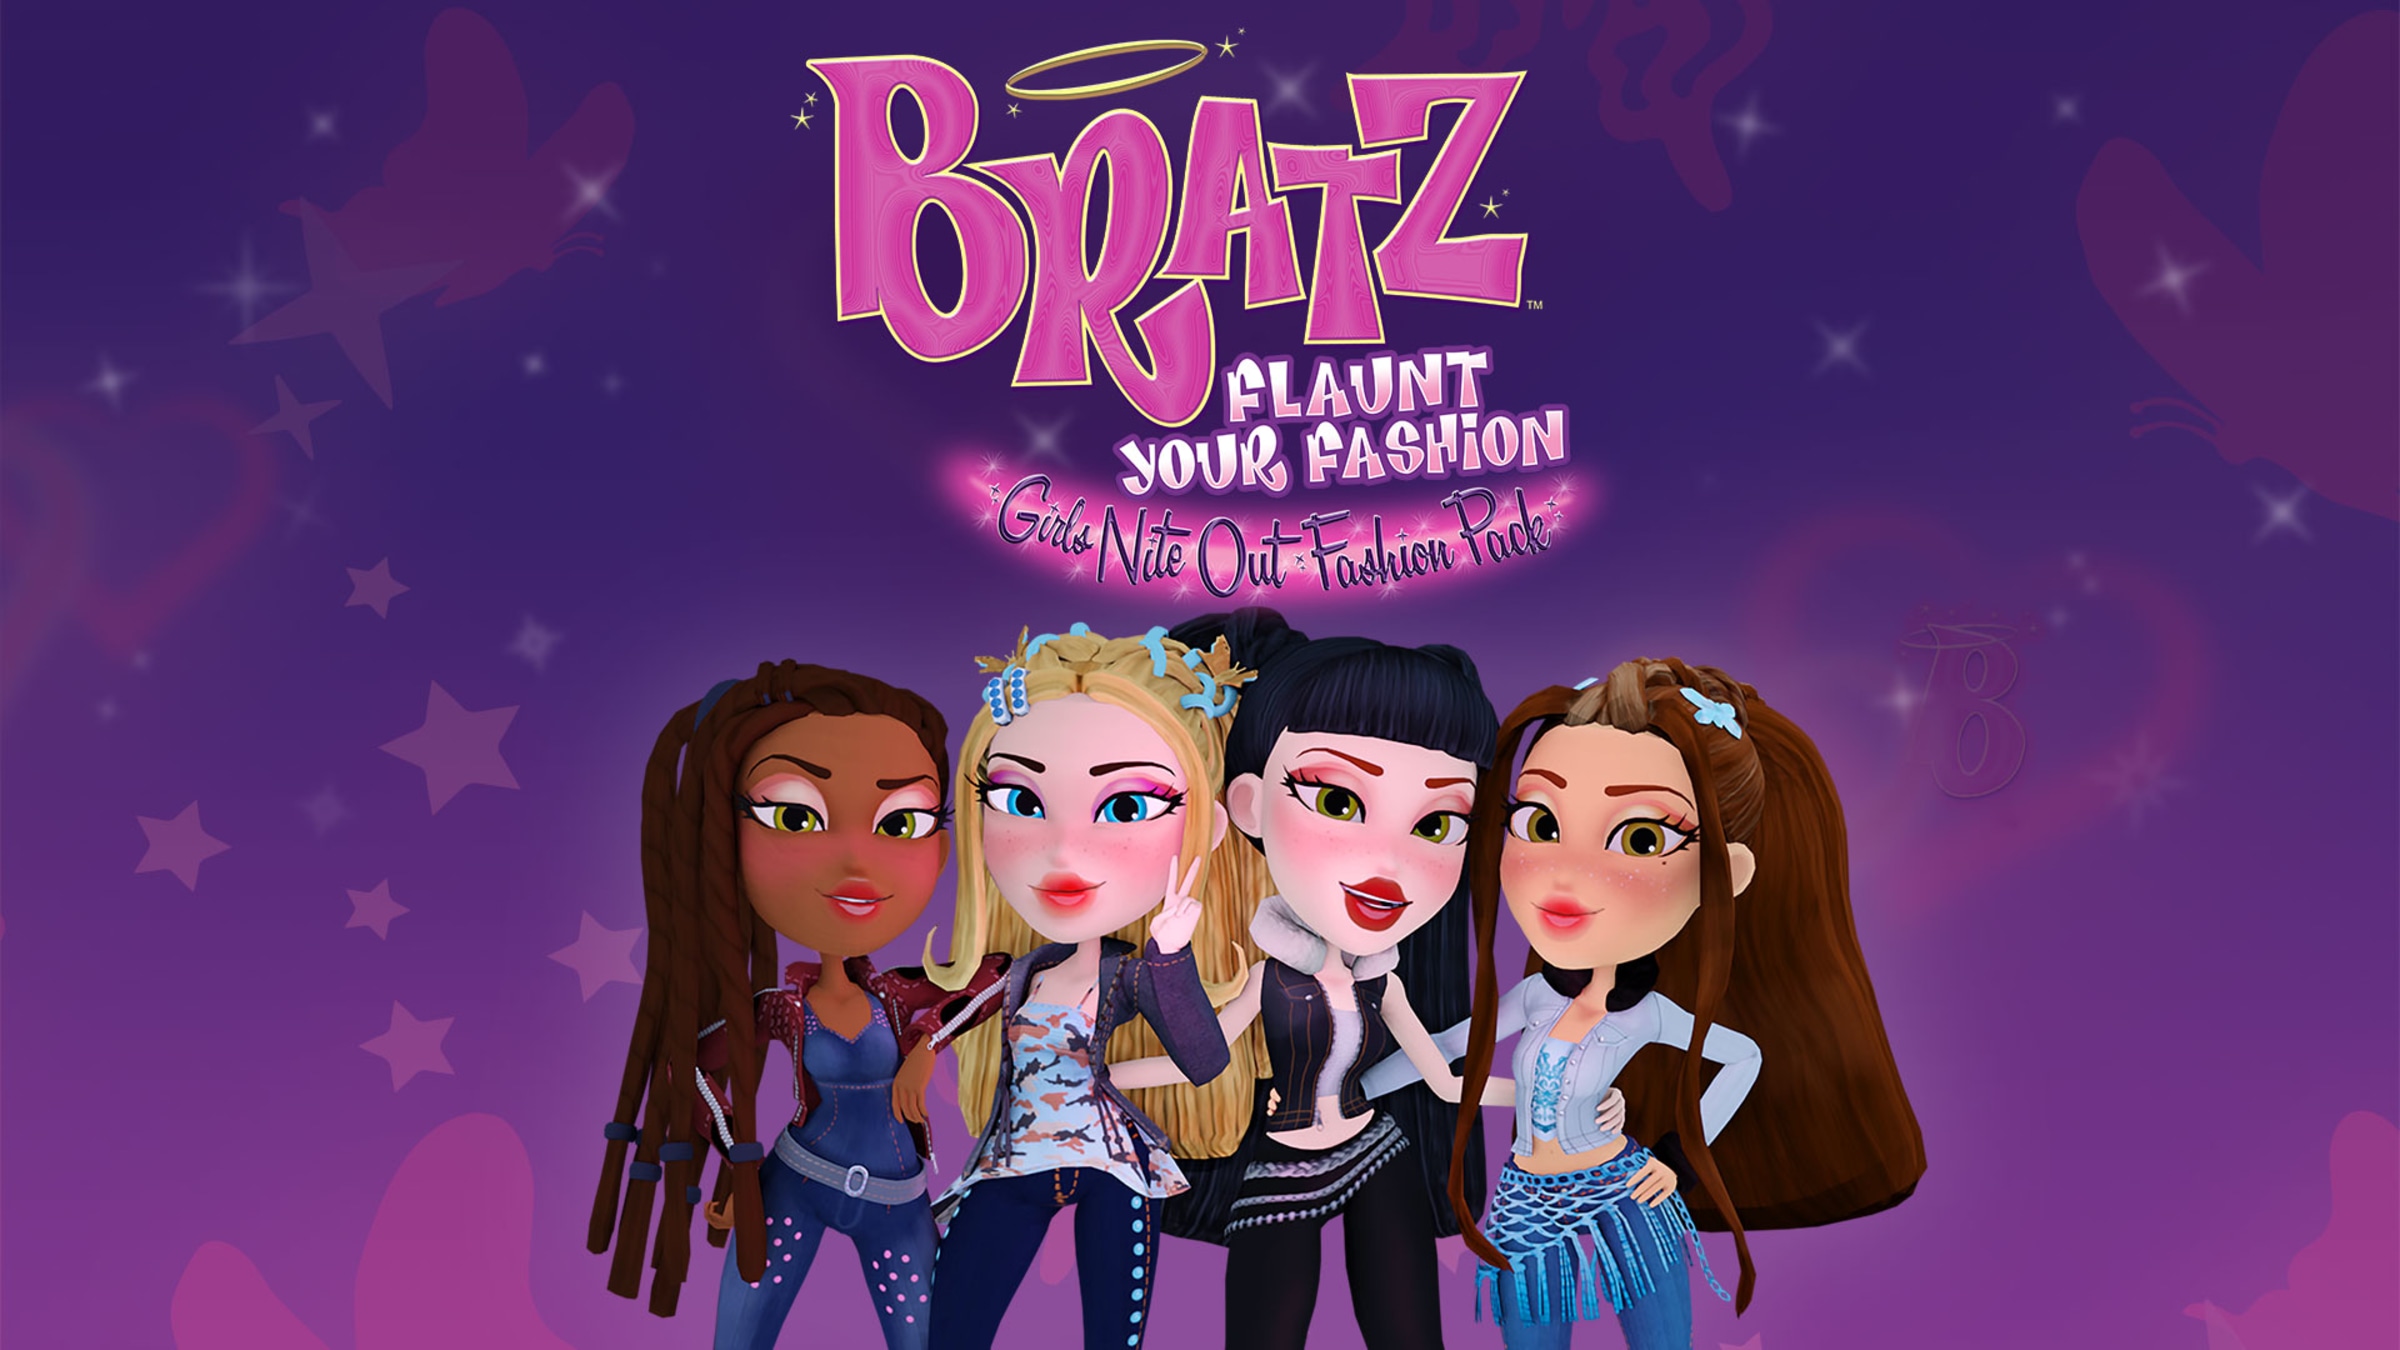 Opiáceo Escrupuloso Desear Bratz™: Flaunt Your Fashion - Girls Nite Out Fashion Pack for Nintendo  Switch - Nintendo Official Site